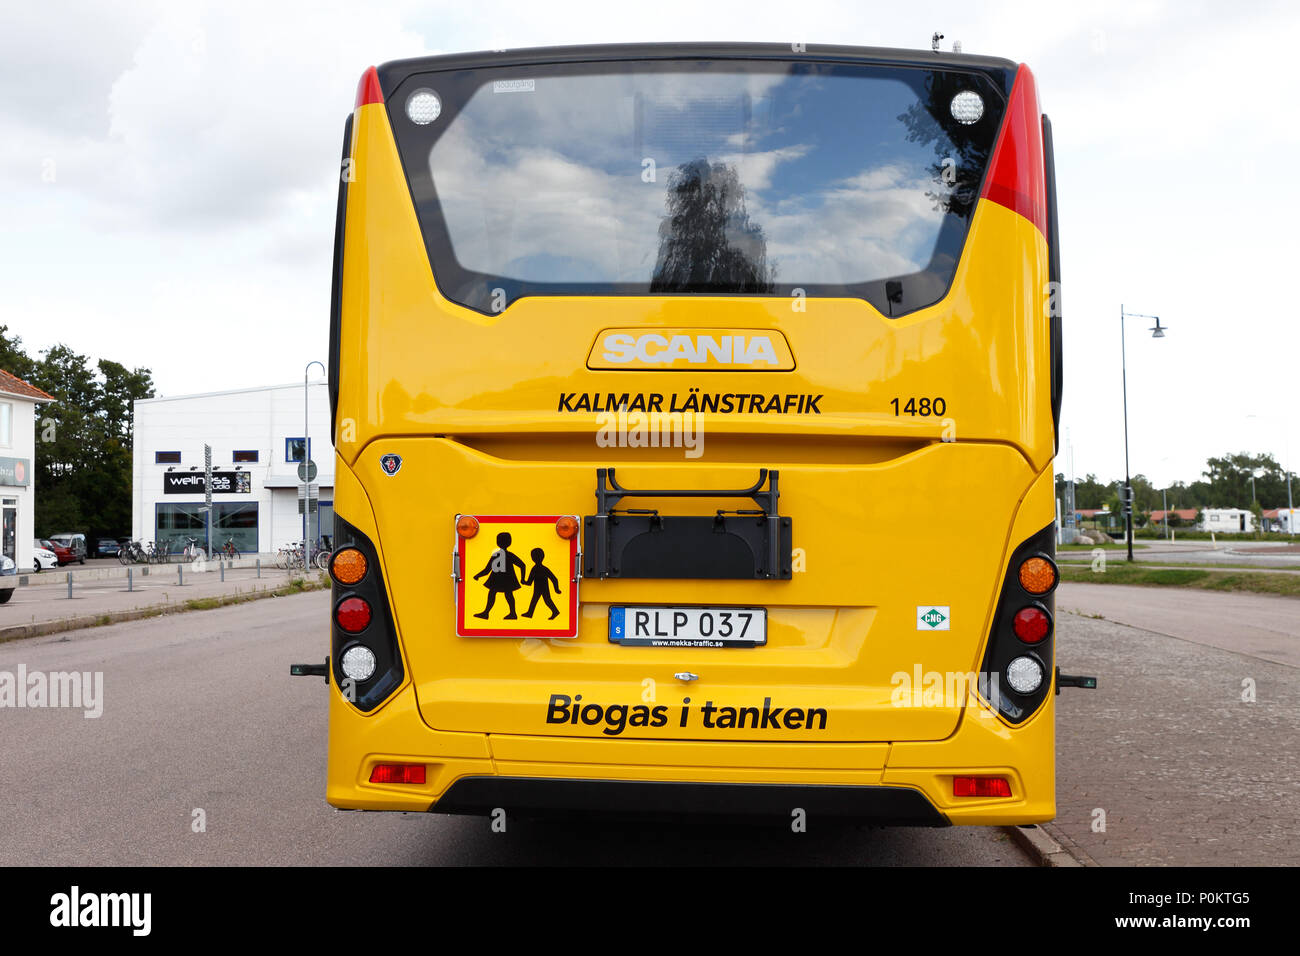 Scania Bus High Resolution Stock Photography and Images - Alamy